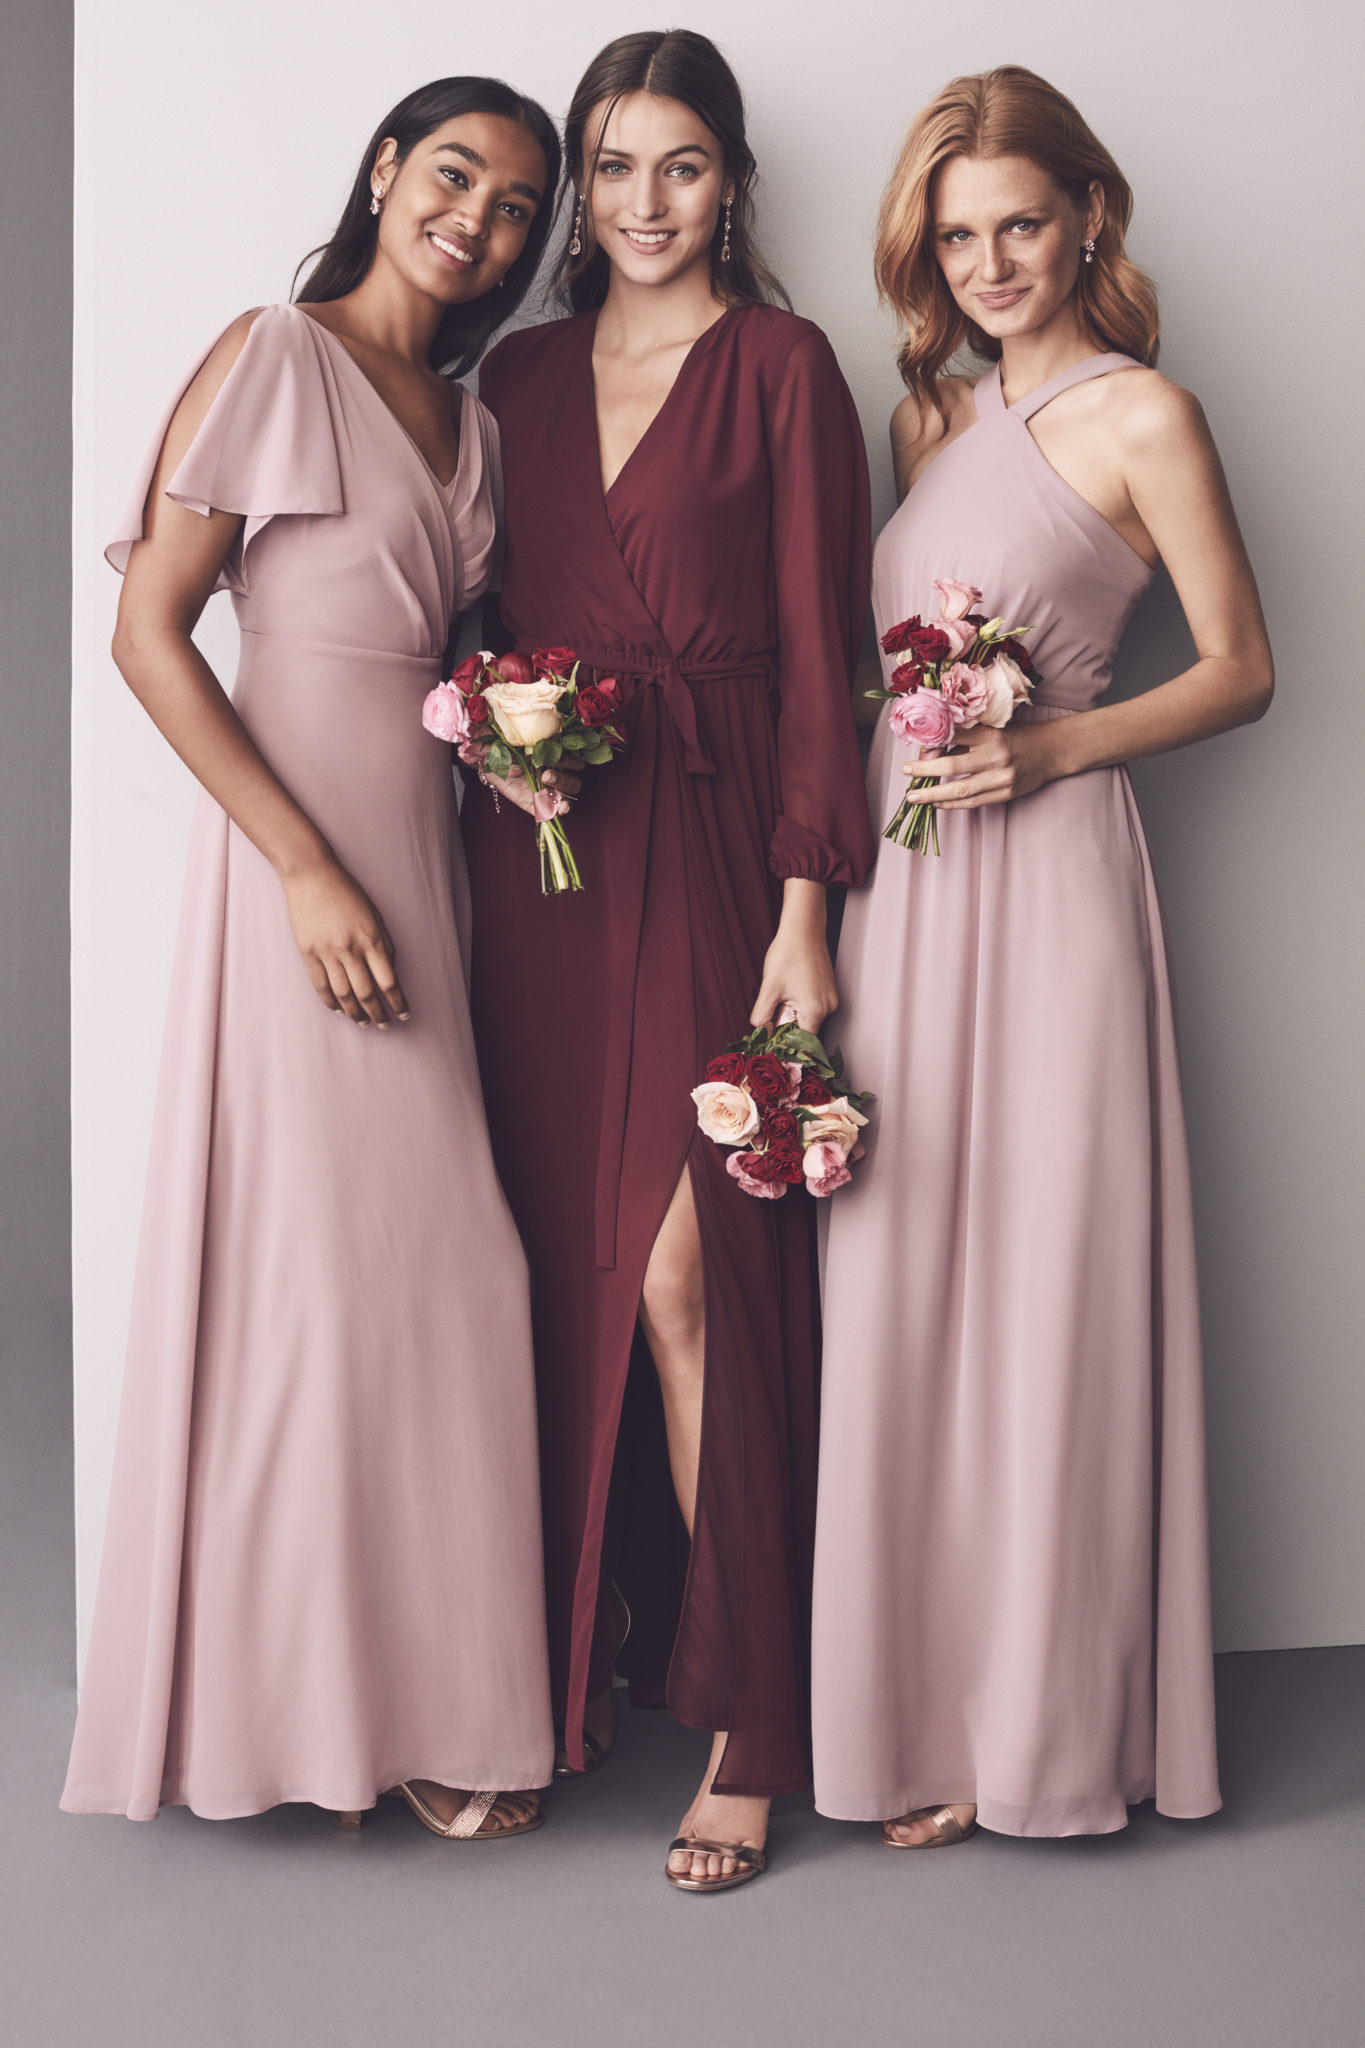 Group of 3 bridesmaids in shades of pink and red